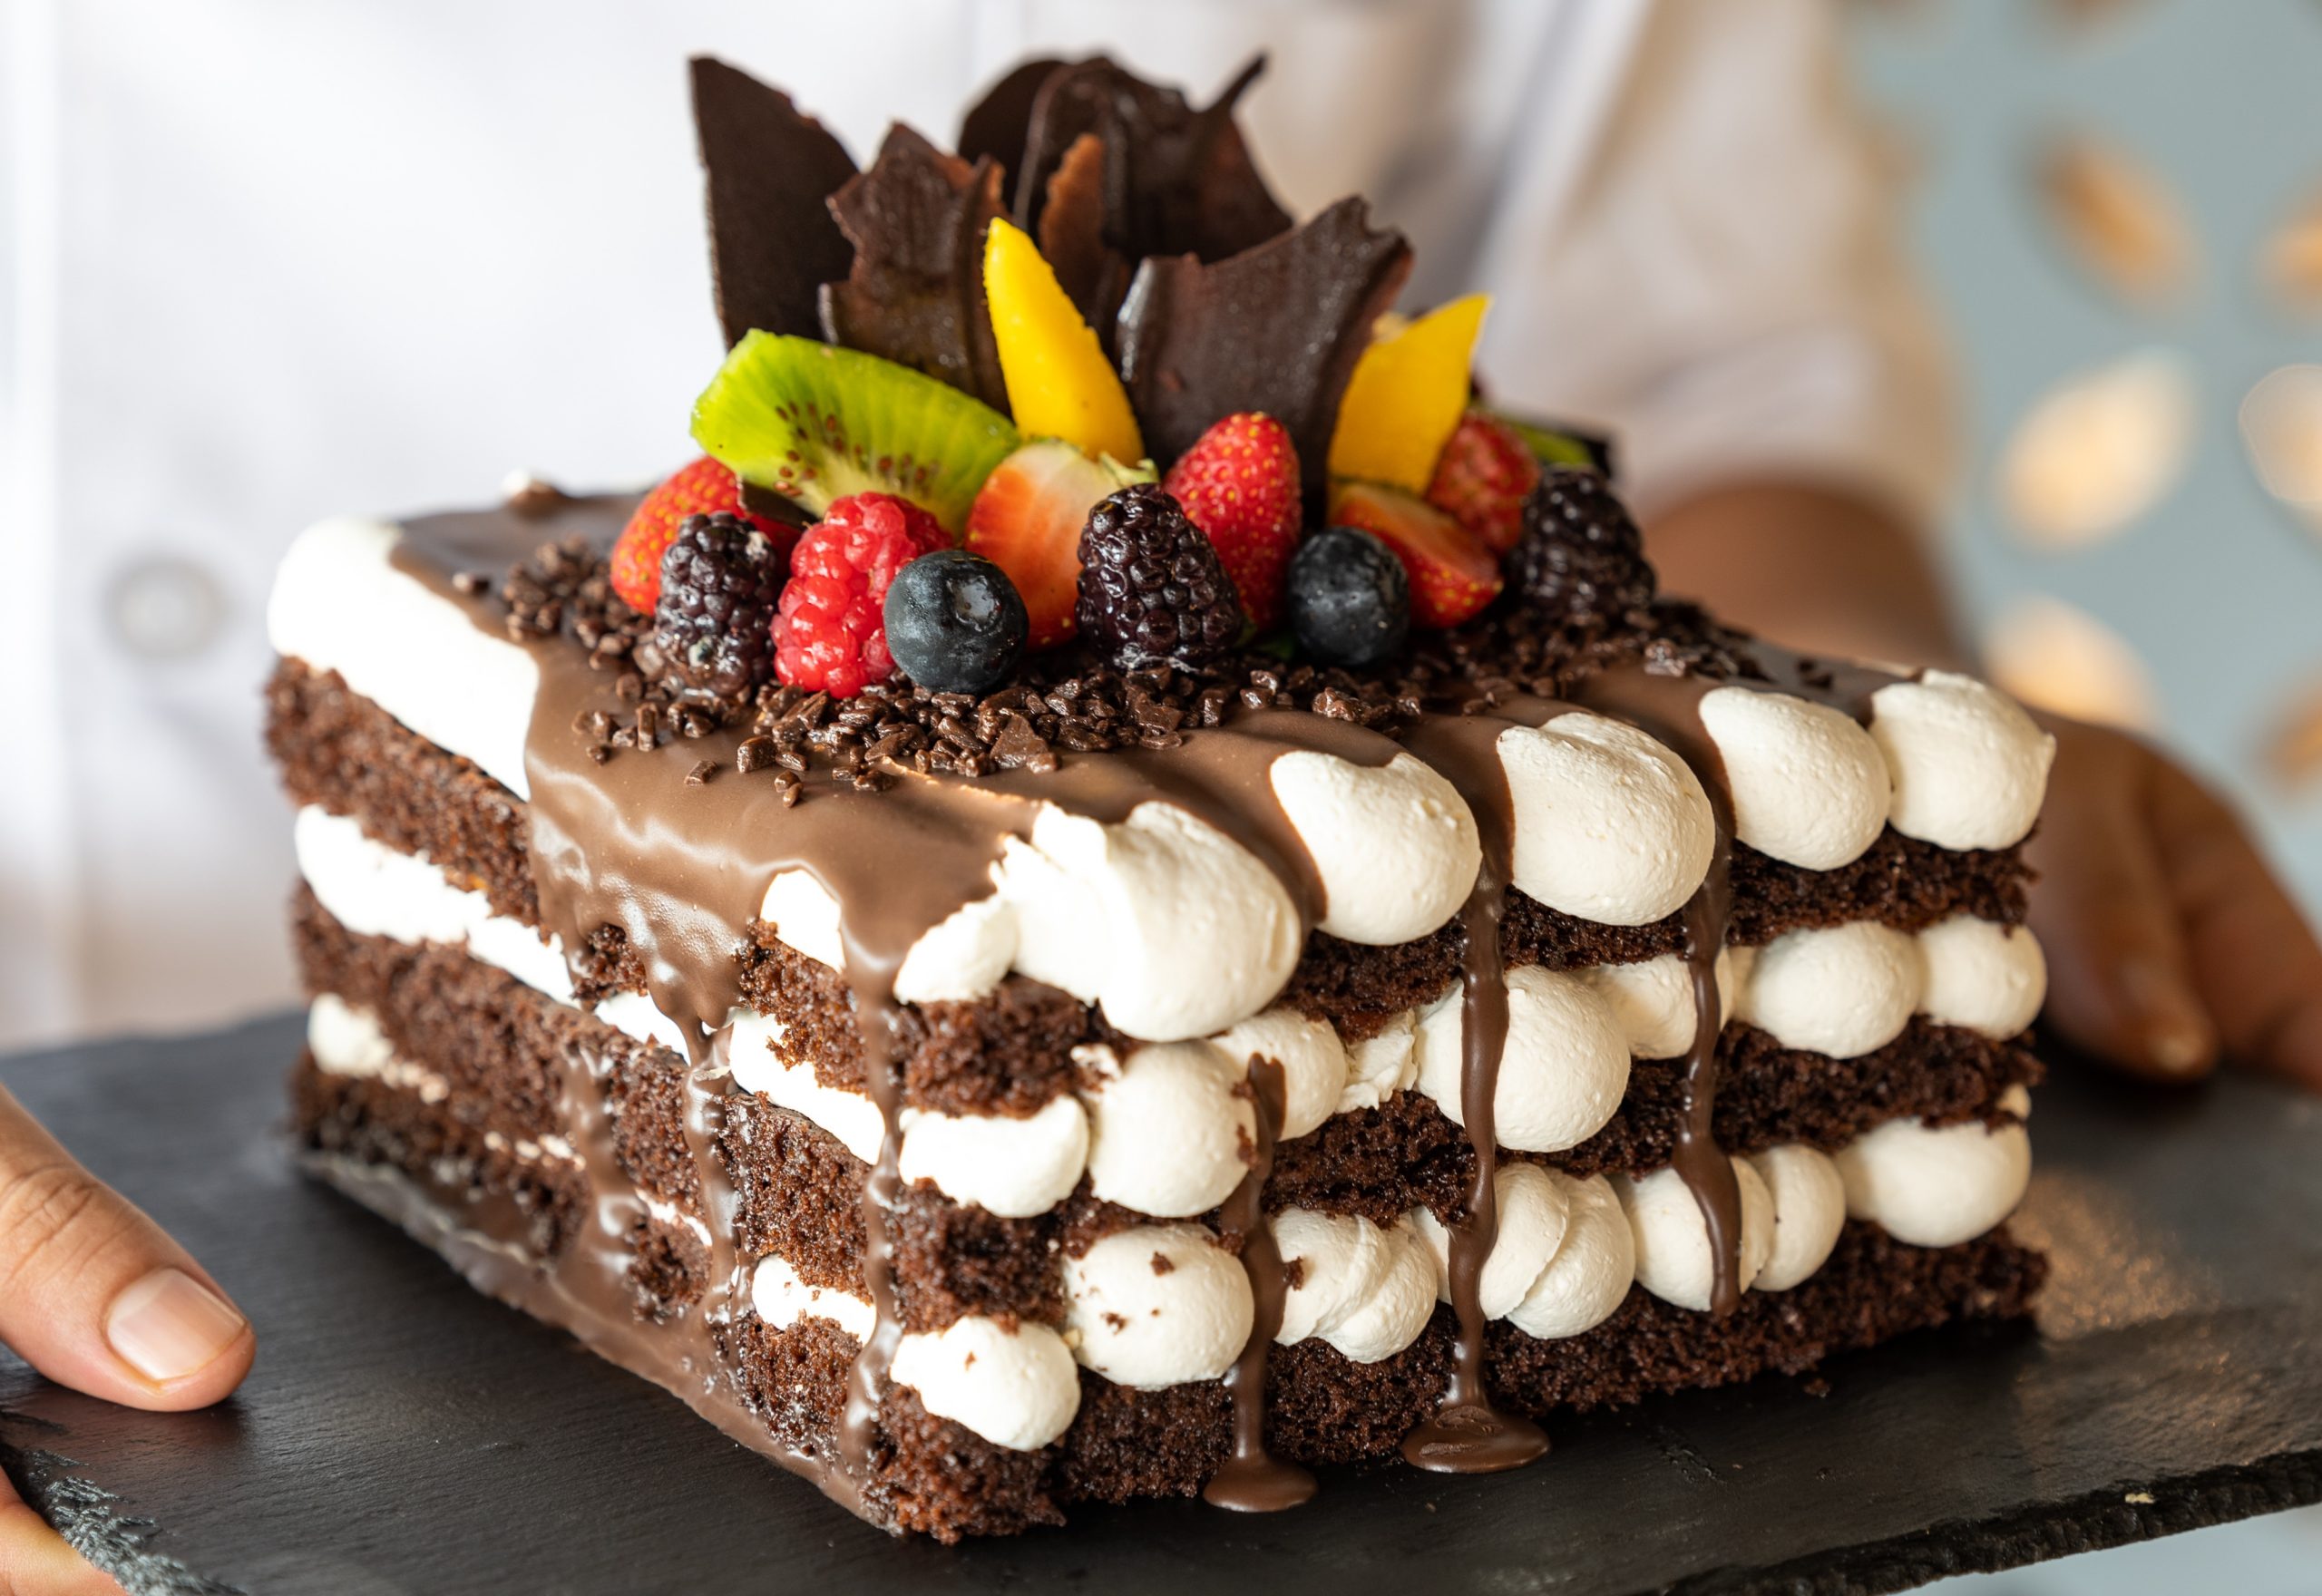 Philippines Cake Delivery |Nationwide delivery, Cake Delivery Manila